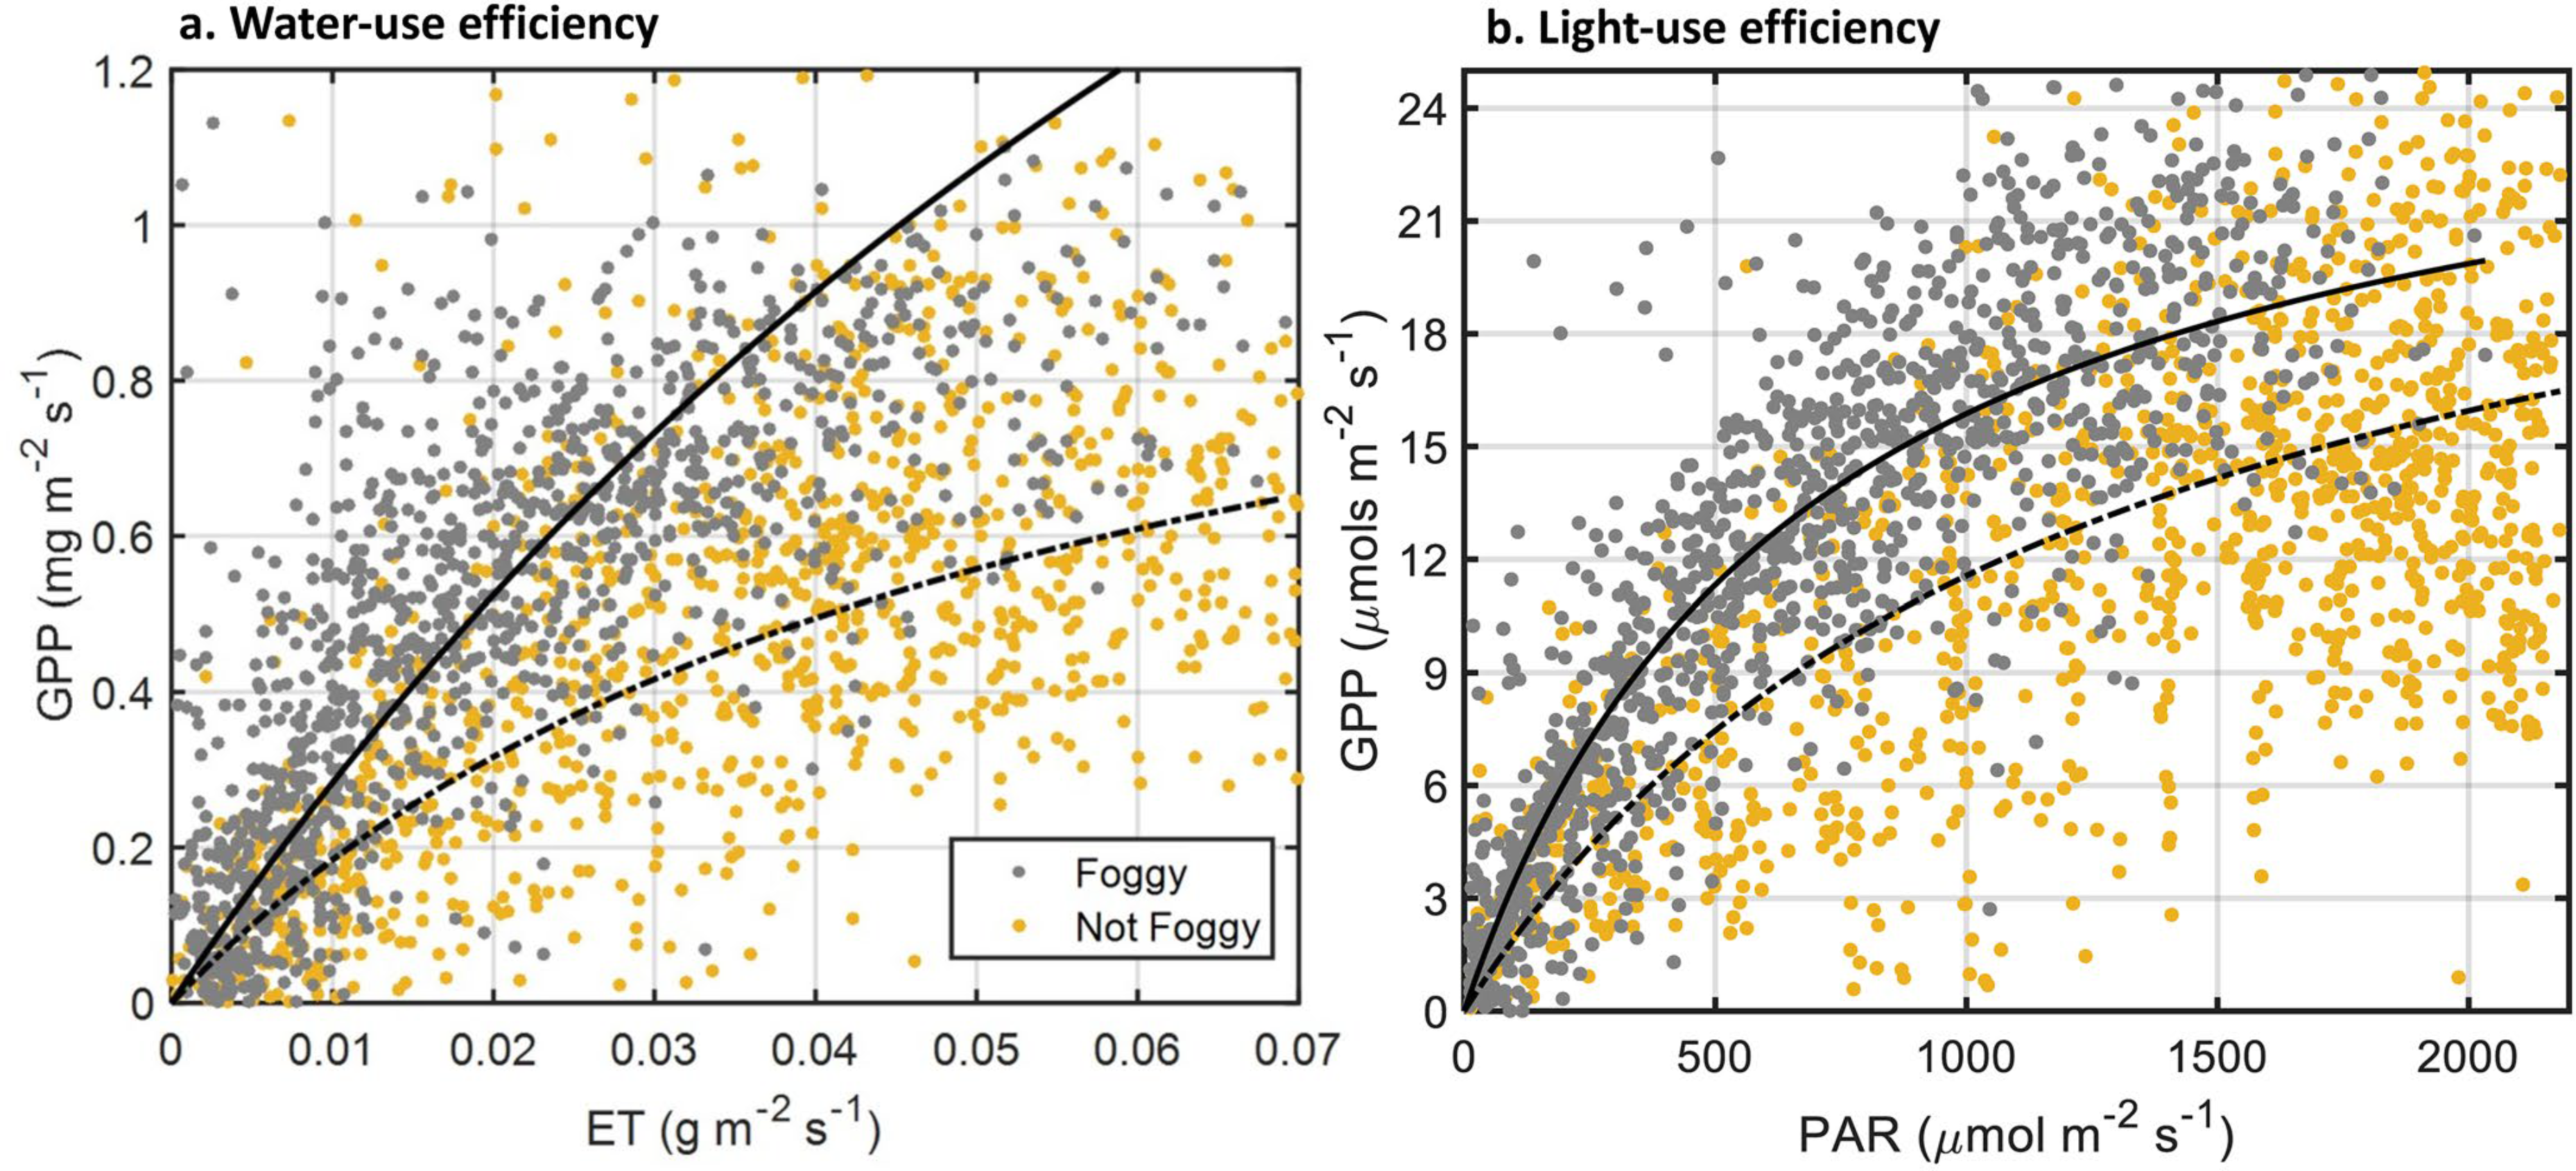 Field-scale (0.5–3 ha) daytime (a) water-use efficiency and (b) light-use efficiency of a strawberry field between foggy (gray) and non-foggy (orange) conditions over the growing season. Each data point represents a 30-min average between June and September 2016 from the eddy covariance tower located at our field site (n = 697, foggy; n = 504, non-foggy).